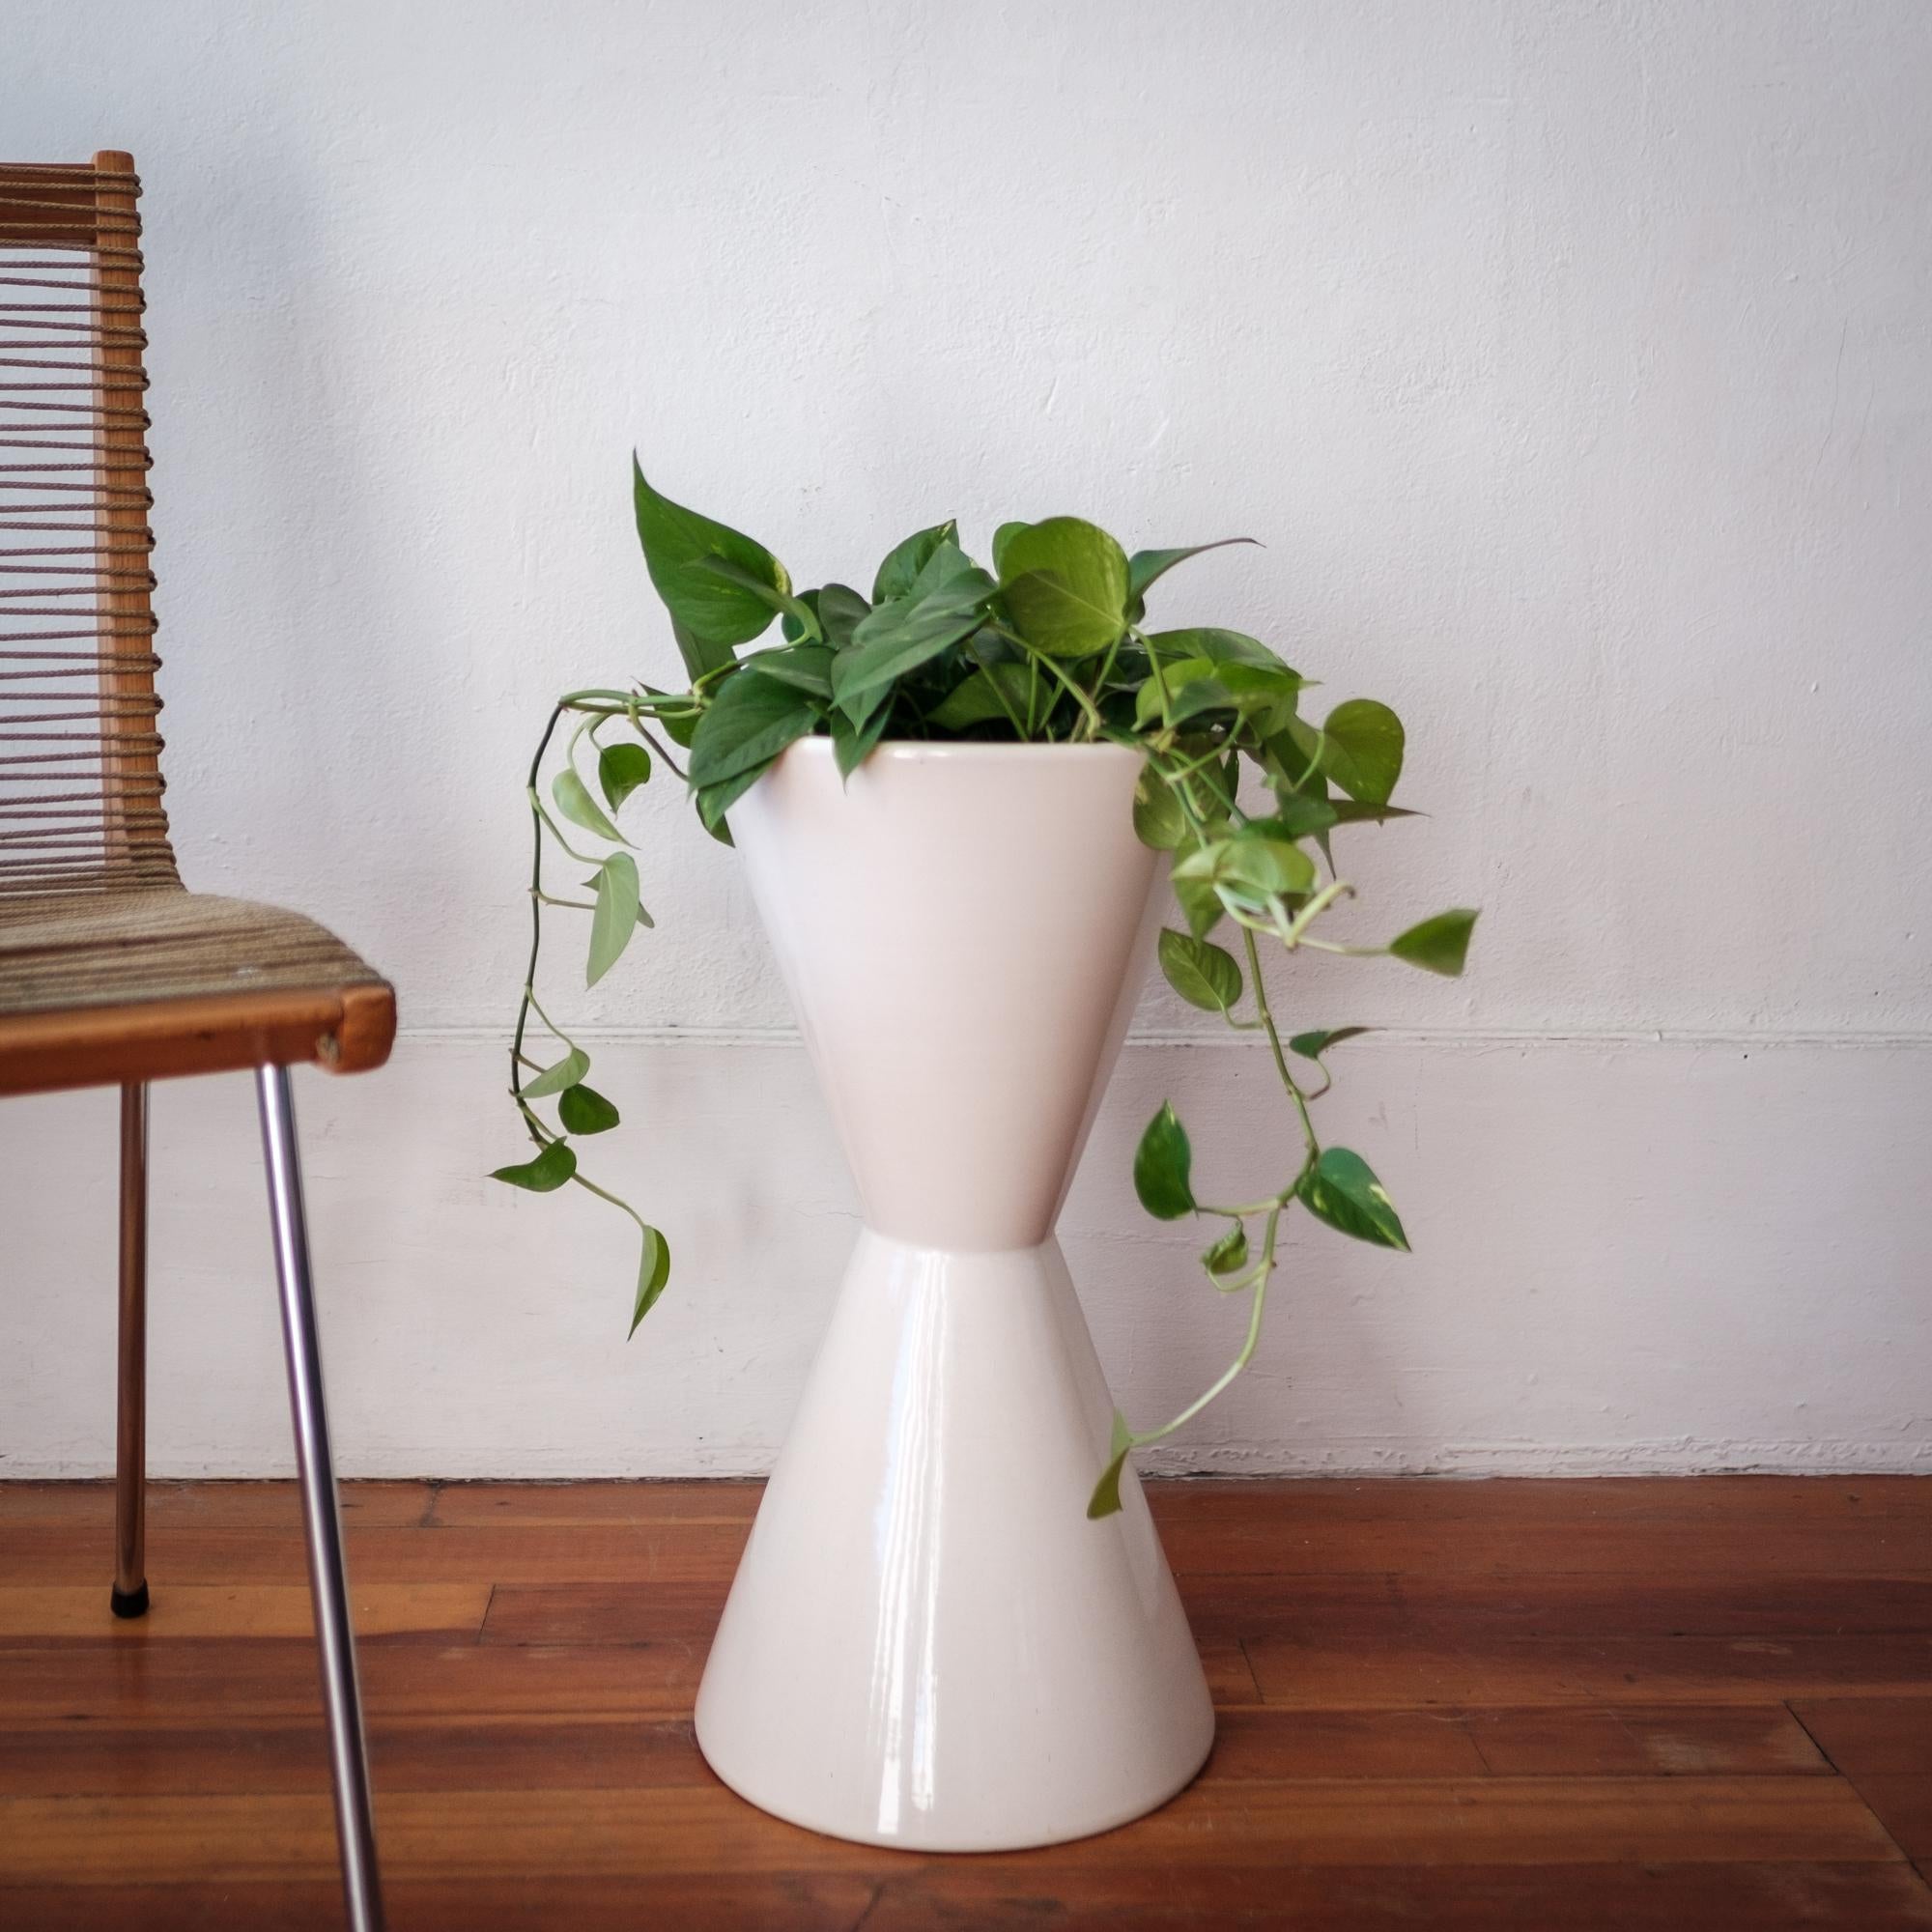 Architectural Pottery double cone planter by Lagardo Tackett. White glaze. Not drilled so it would work great indoors or outside. Architectural Pottery is the epitome of California Mid-Century Modern design.